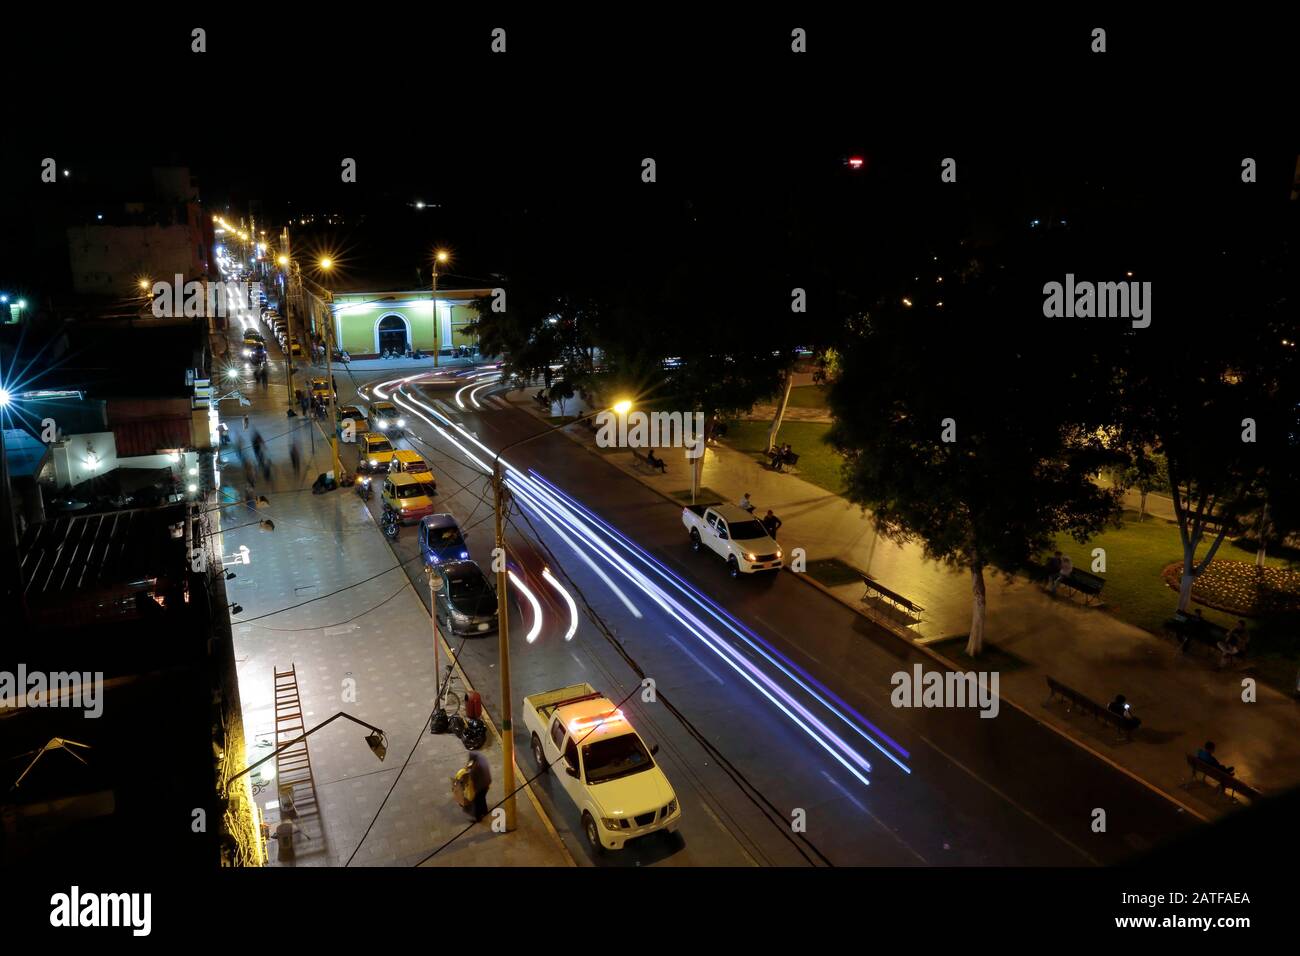 Particular scene of the Ica Plaza de armas during the night. Ica-Peru Stock Photo